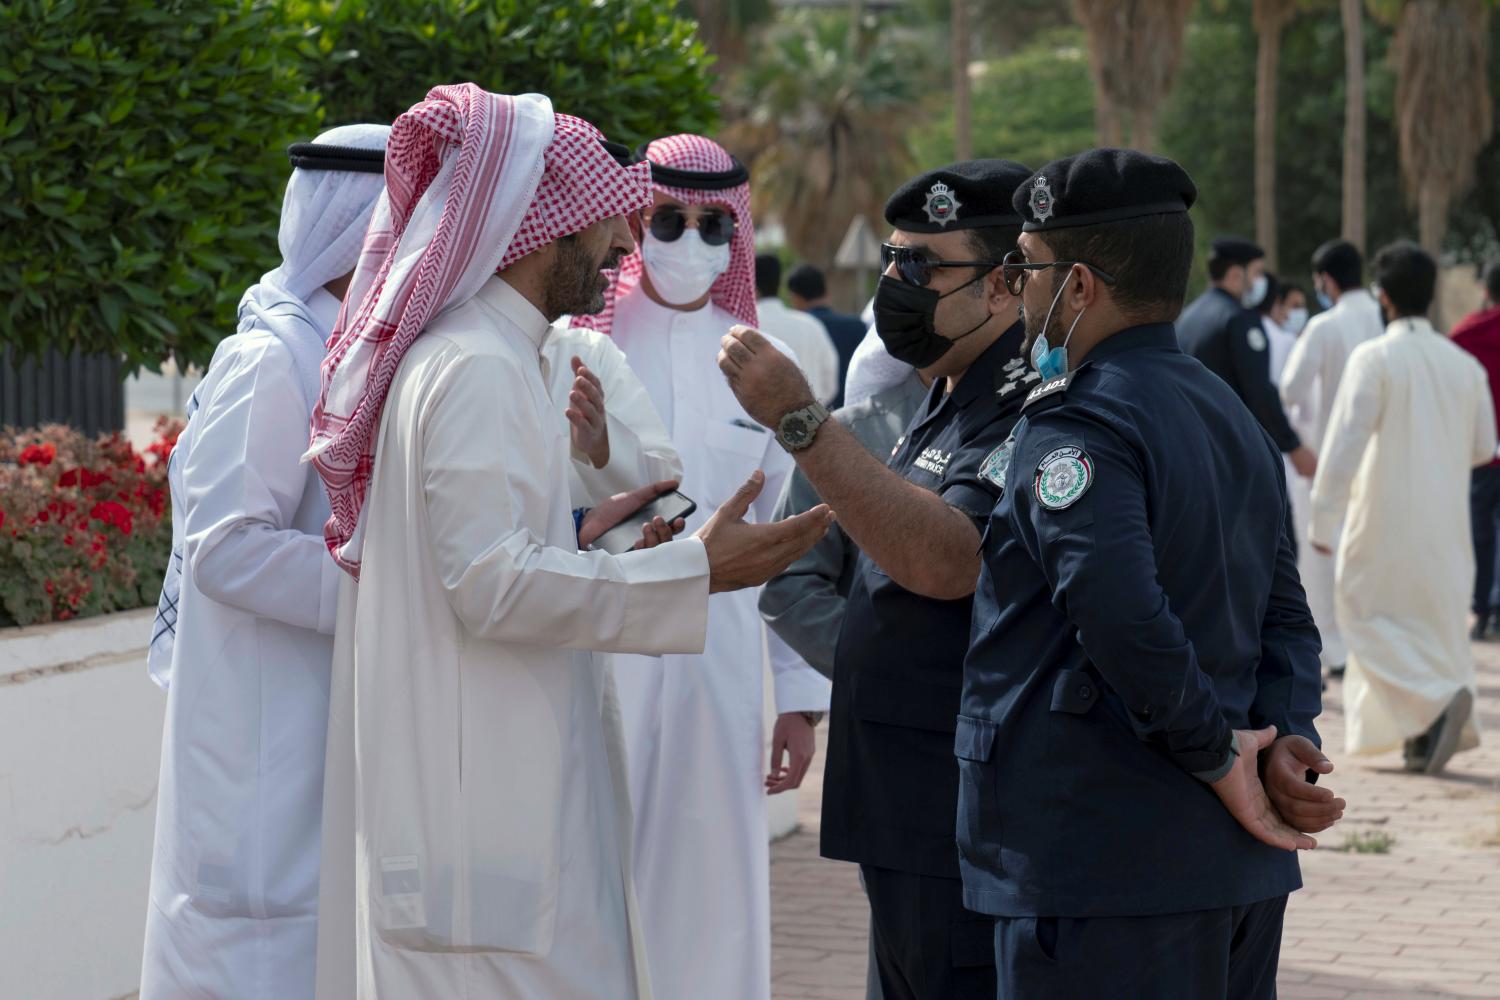 Demonstrators speak with police officers as they gather in front of Kuwait National Assembly building to protest against the nullification of Bader al-Dahoum's membership in the parliament, in Kuwait City, Kuwait, March 30, 2021.  REUTERS/Stephanie McGehee